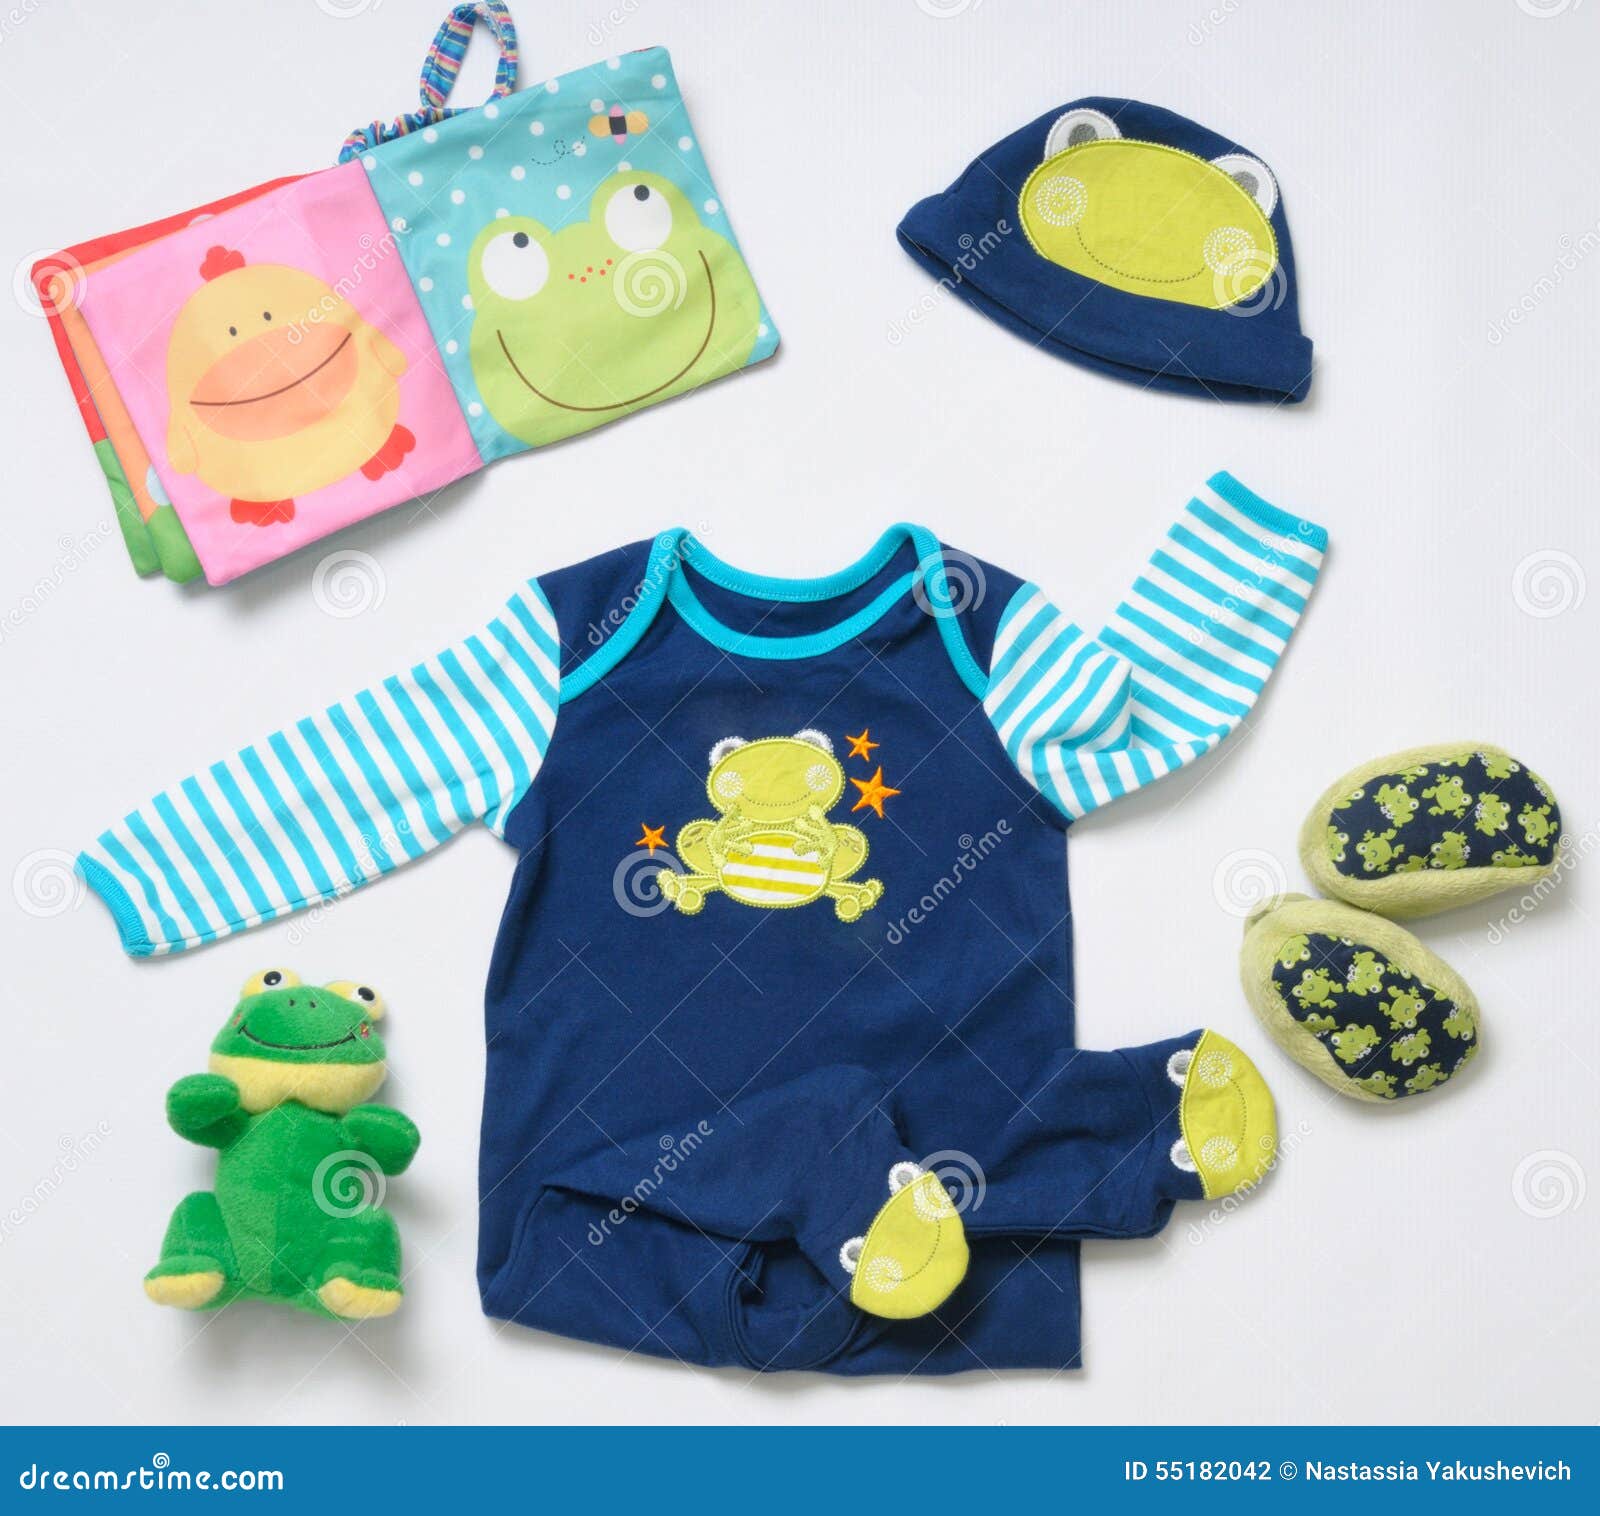 https://thumbs.dreamstime.com/z/top-view-fashion-trendy-look-baby-boy-clothes-funny-frog-toy-stuff-concept-55182042.jpg